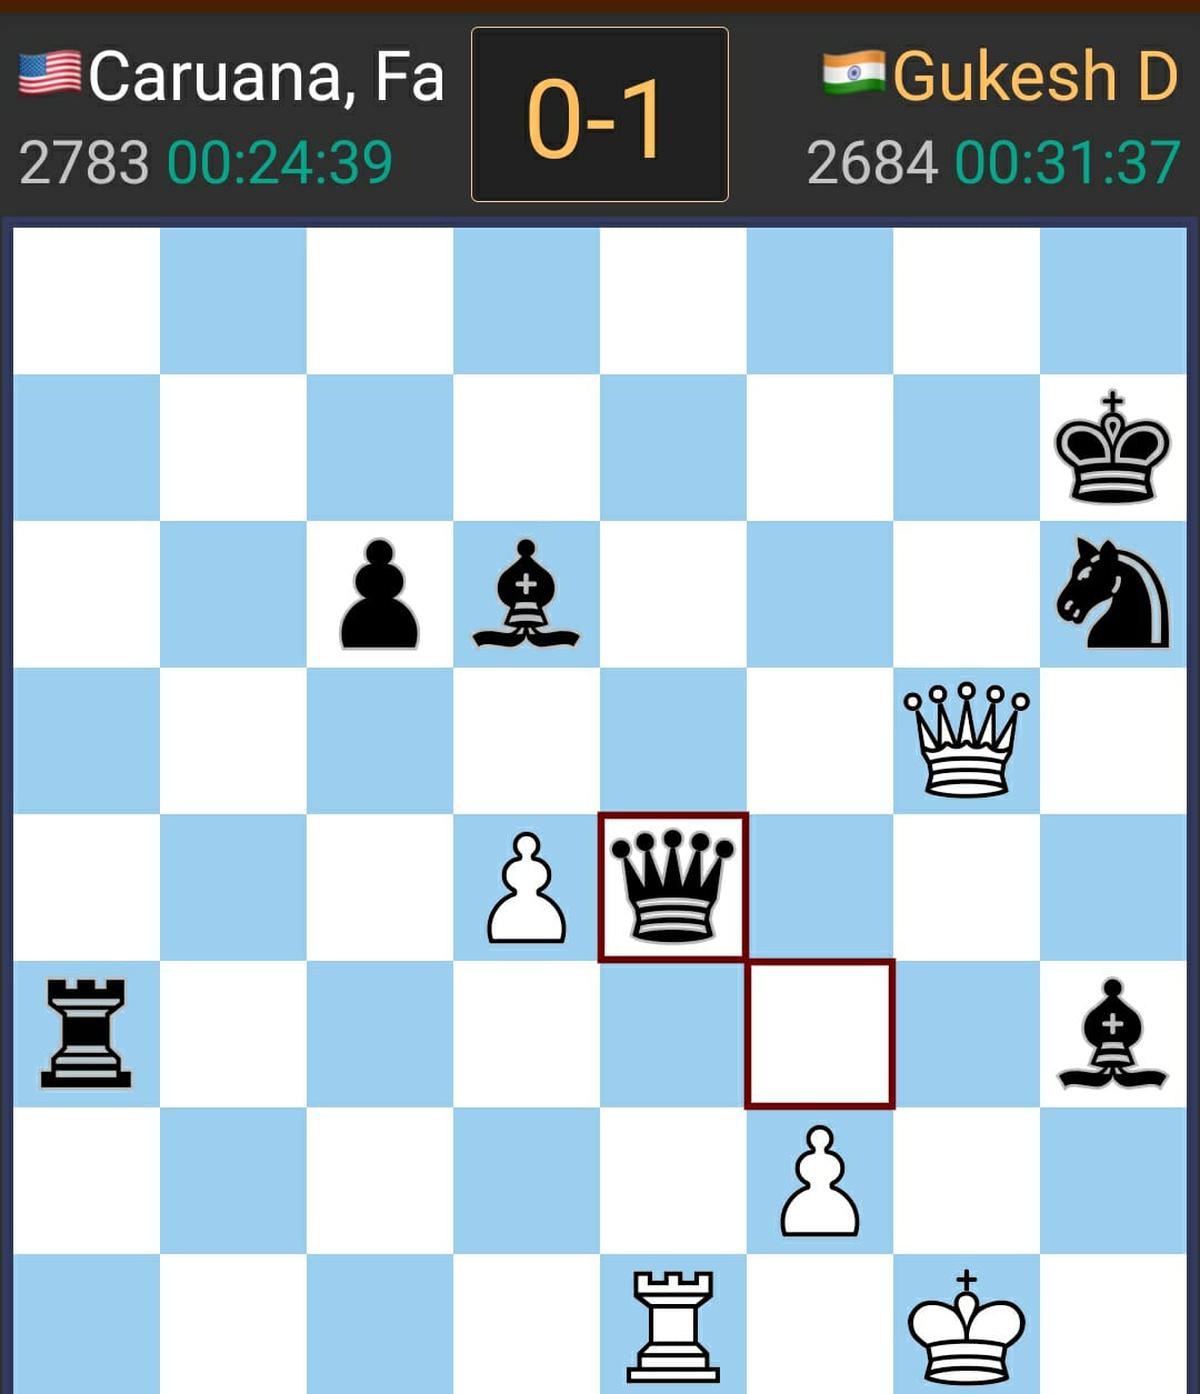 Chess Olympiad 2022 GK part 2, Chess Olympiad 2022 GK Questions